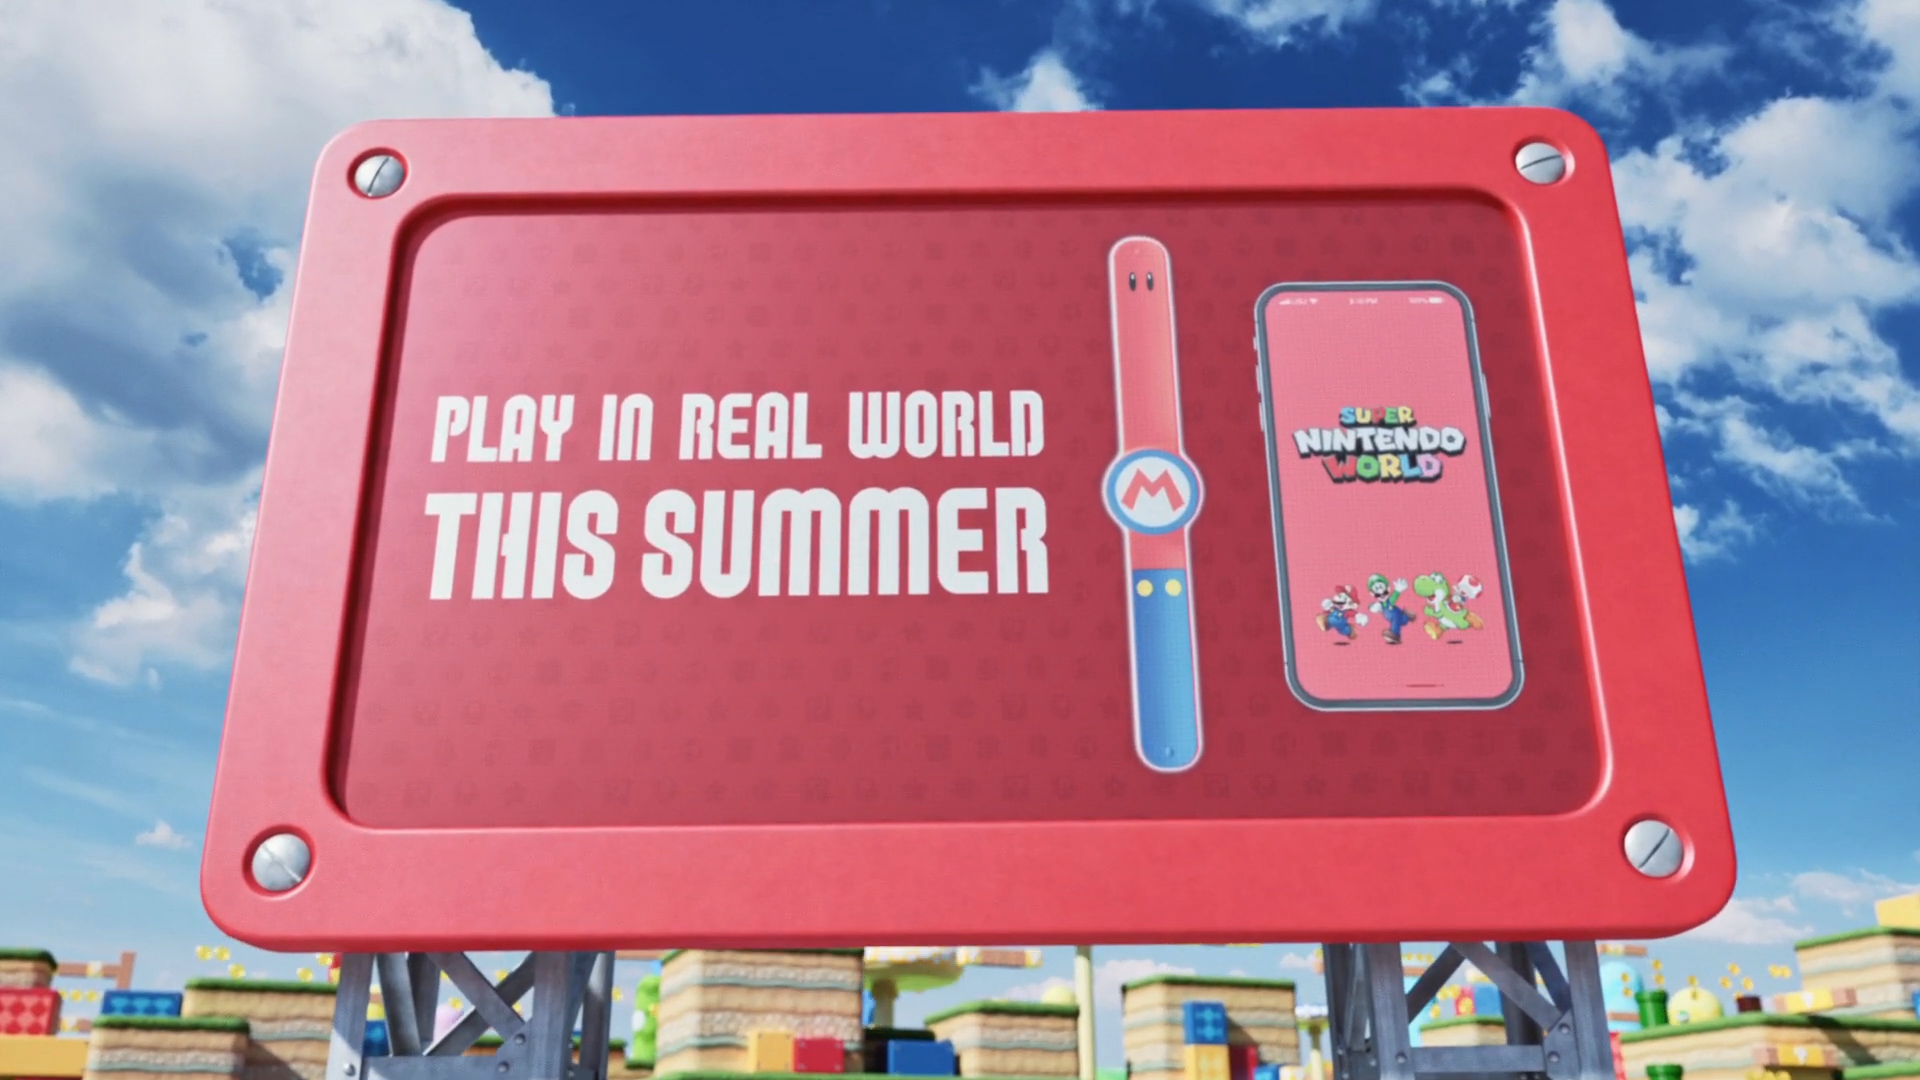 Super Nintendo World Details Revealed for Interactive Power Up Band – Separating Fact from Fiction